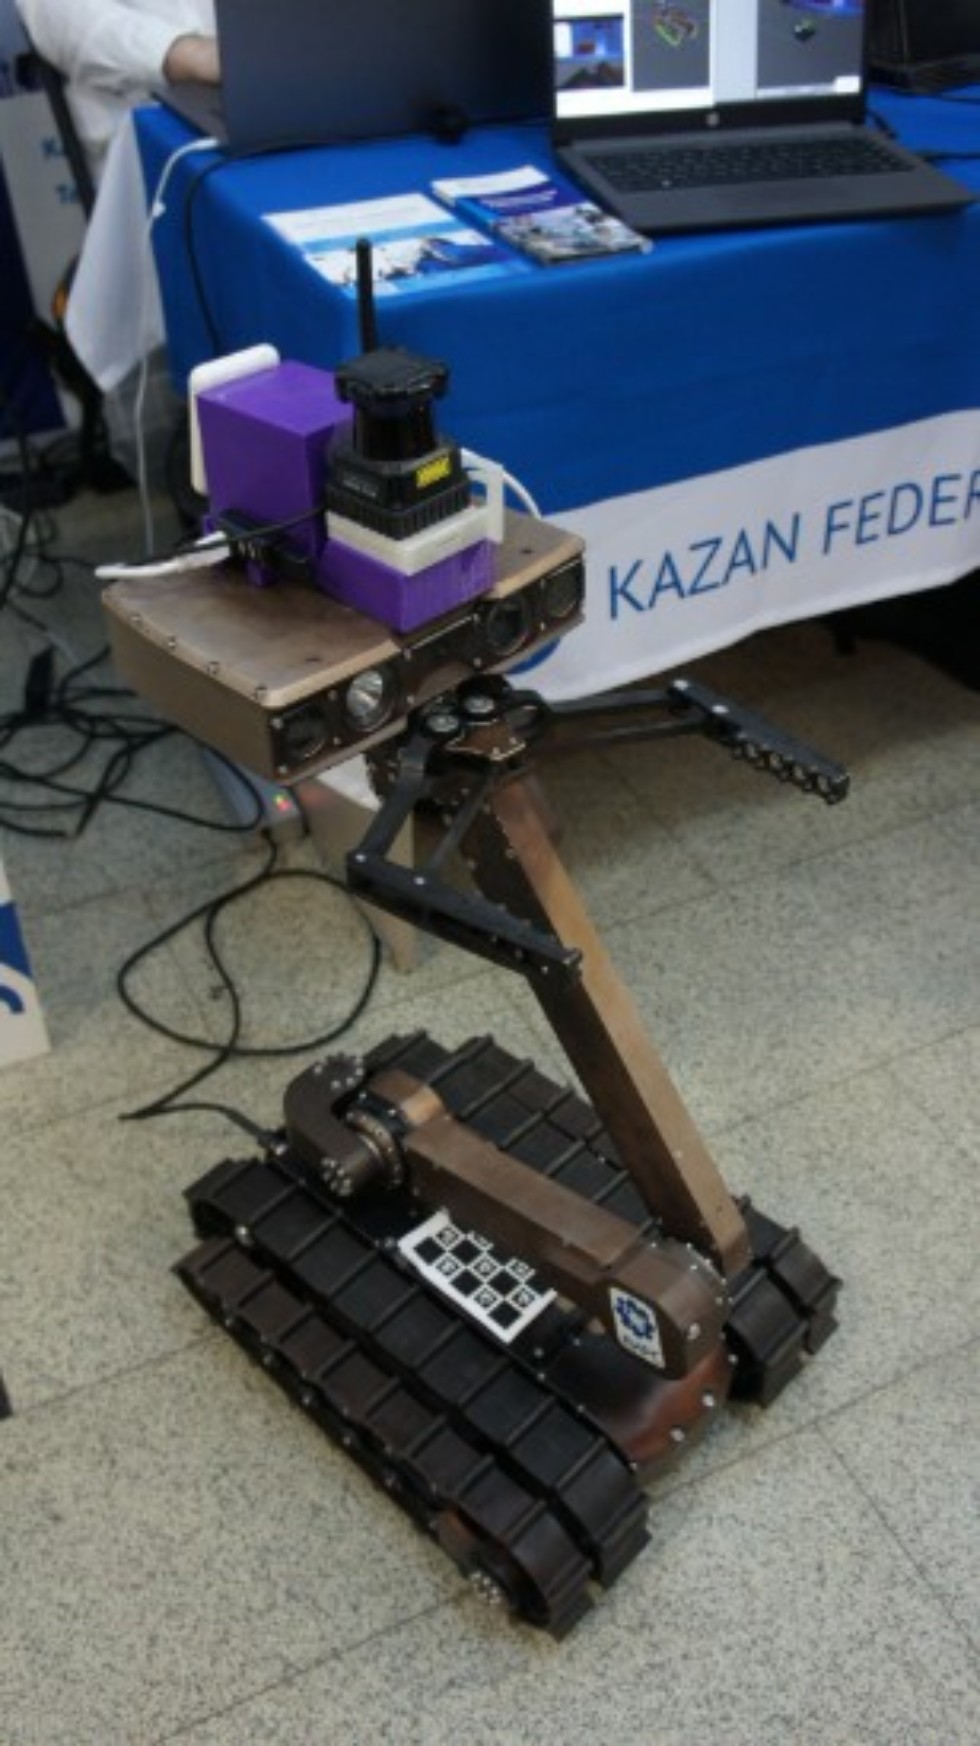 An employee of the Laboratory of intelligent robotic systems took part in the Science Festival for the 1-year students of Kazan Federal University